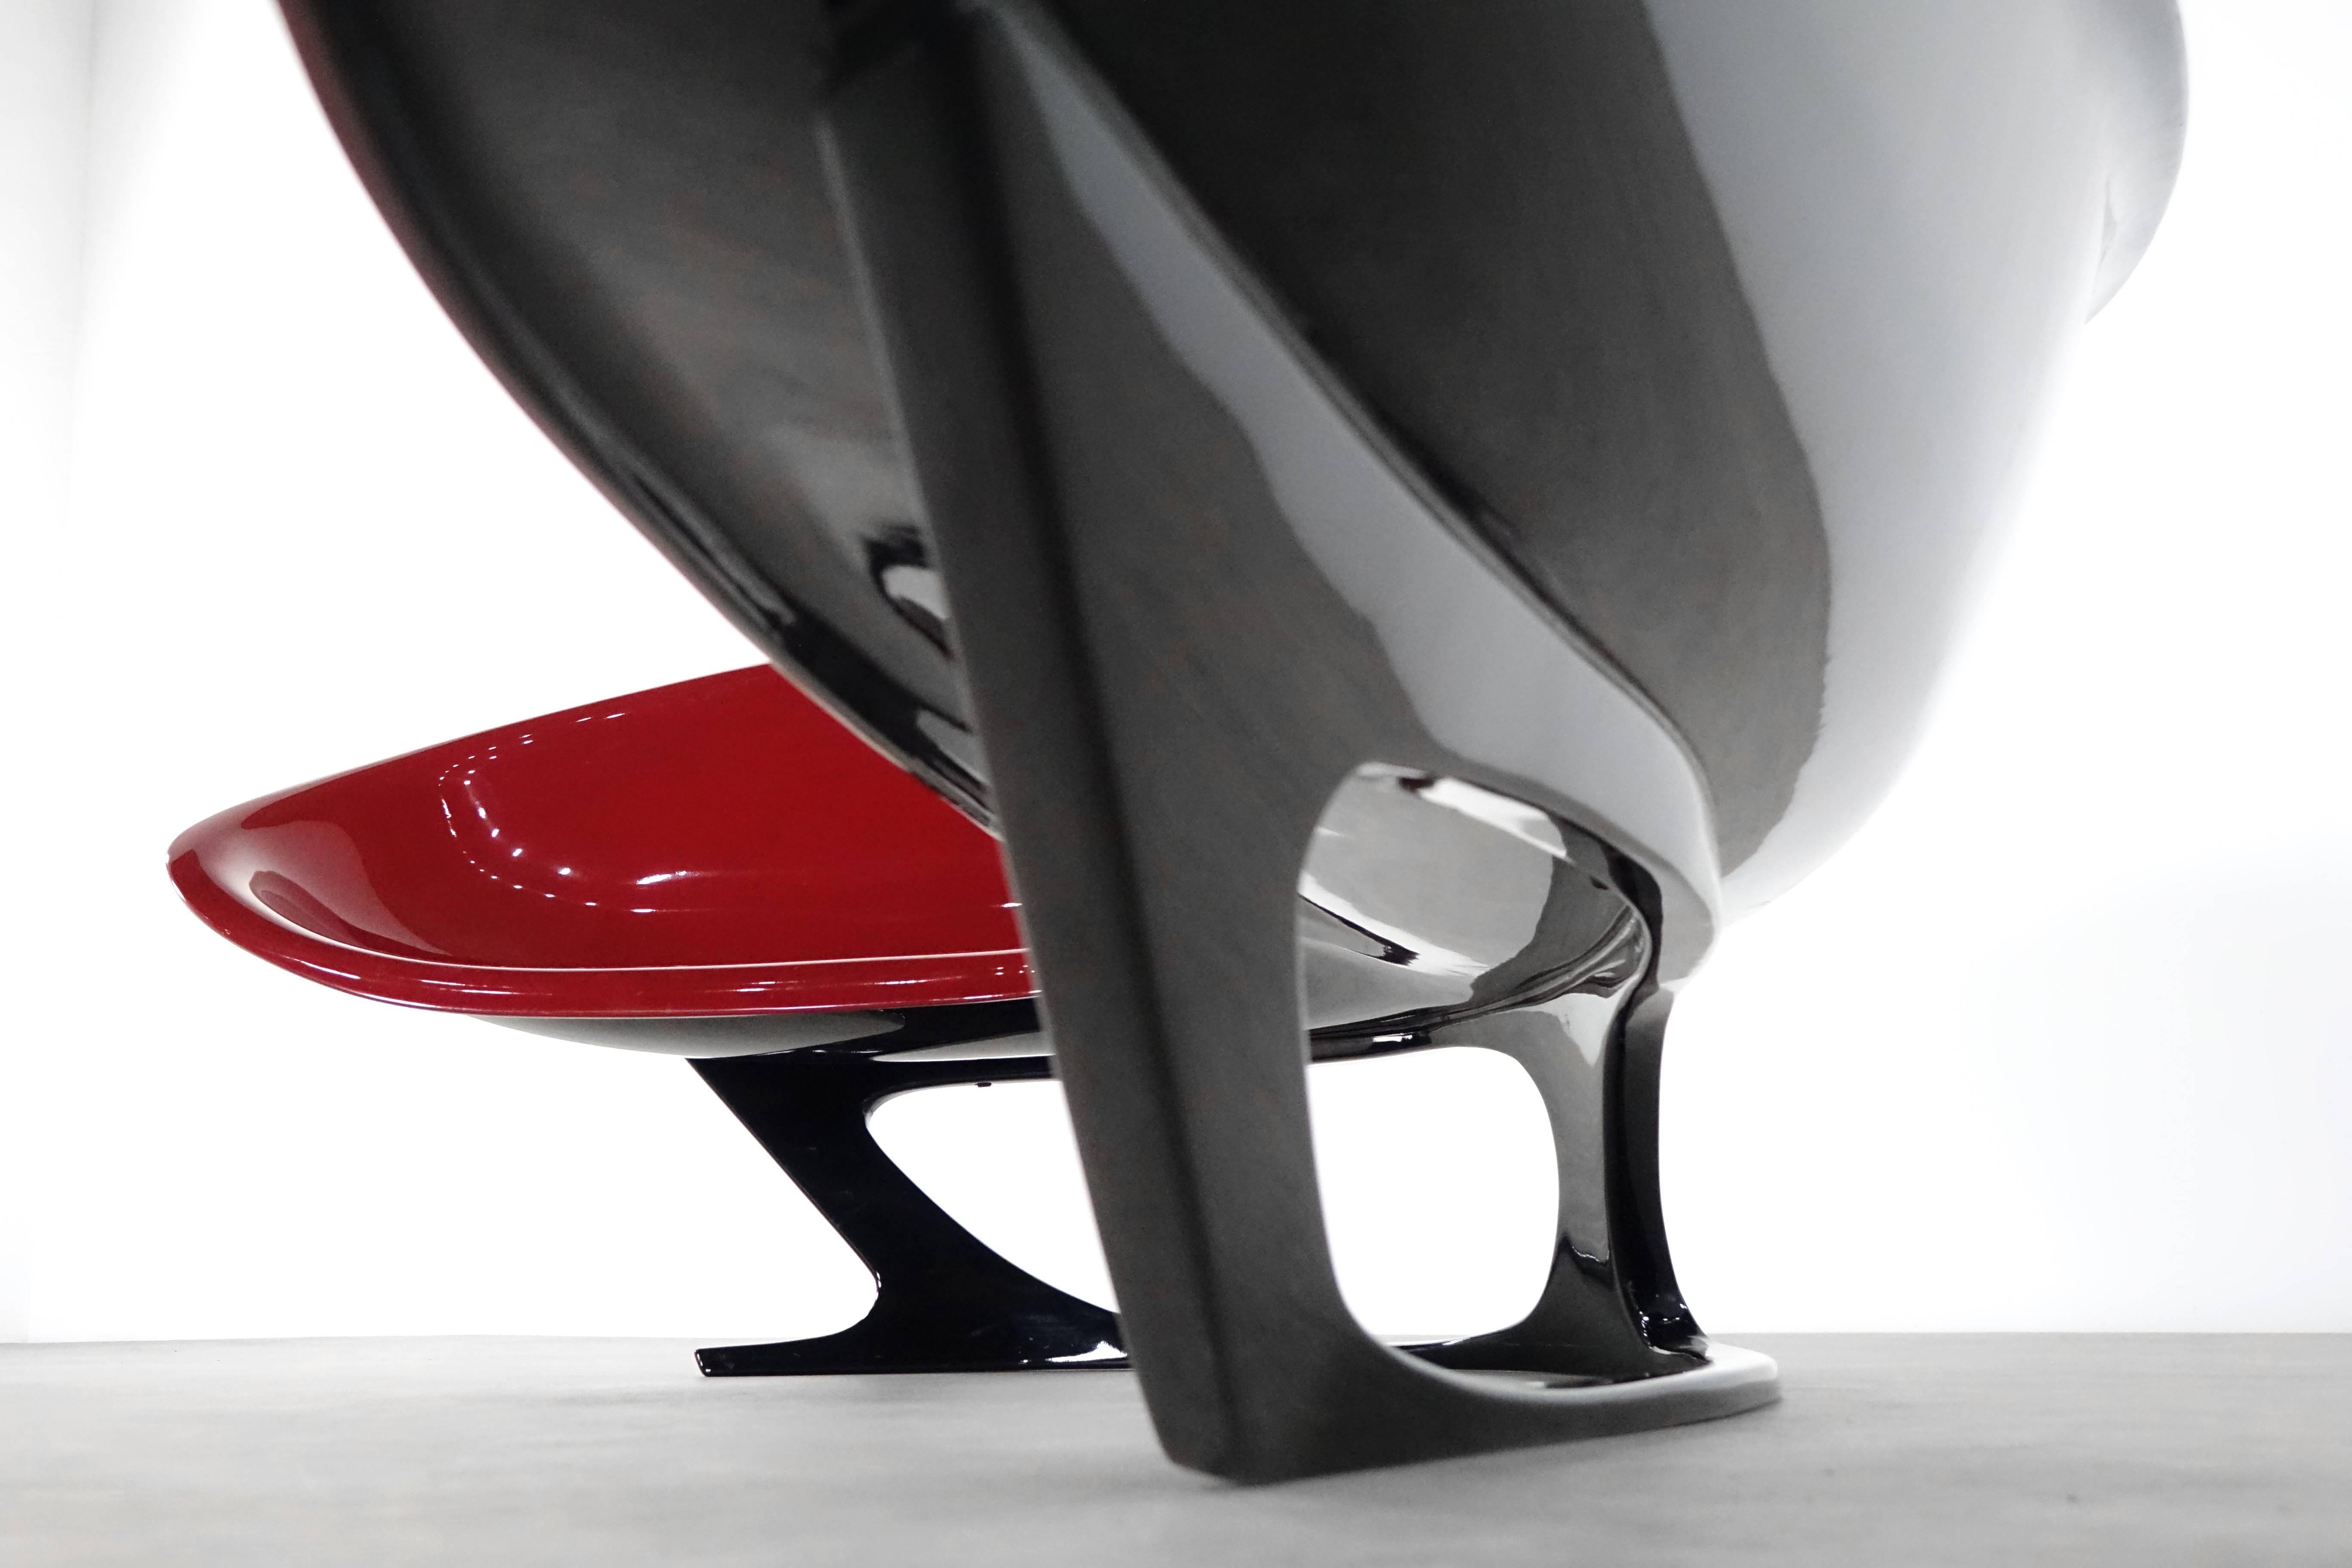 Stefan Sterf, rare 'Ecstasy' lounge chair, circa 1990, for Axel Zoellner-Geistert, Phoenix GmbH, Berlin. Manufactured by Axel Zoellner-Geistert, Phoenix GmbH, Berlin. Plastic seat in boomerang shape, dark red and black. Only a total of seven were